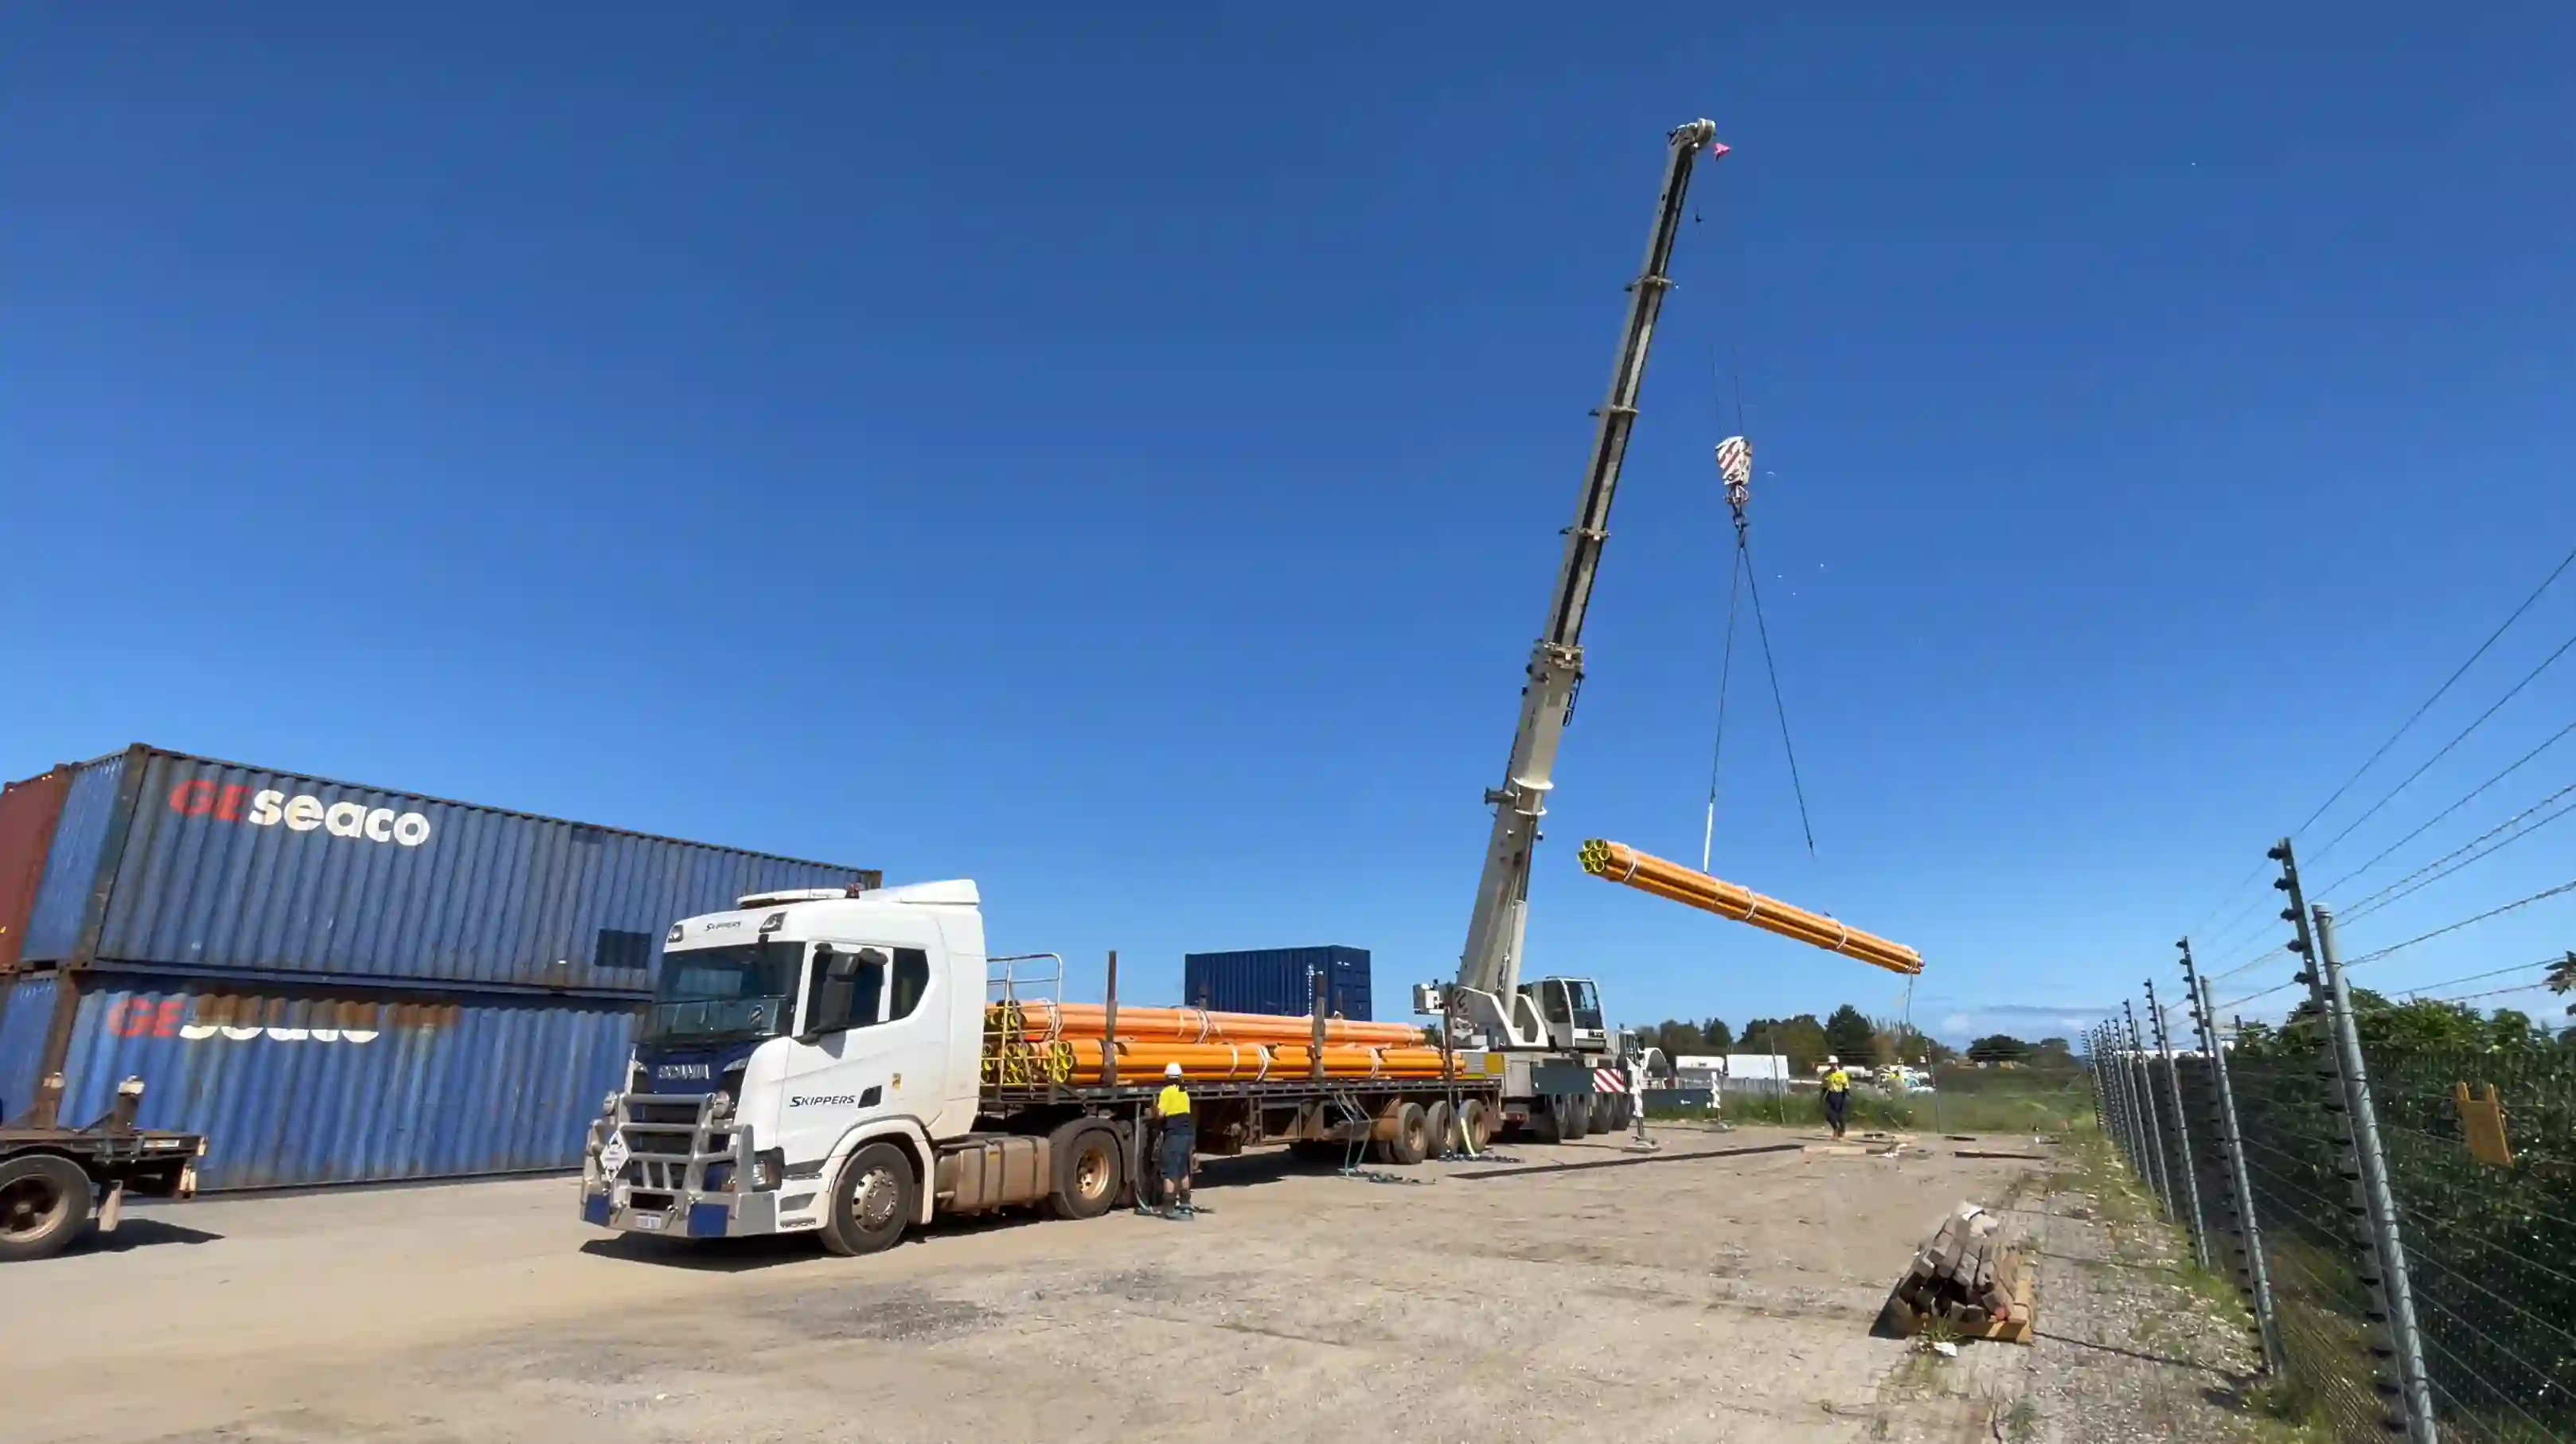 Skippers Transport truck with crane unloading large pipes at a logistics site in Perth, Western Australia.